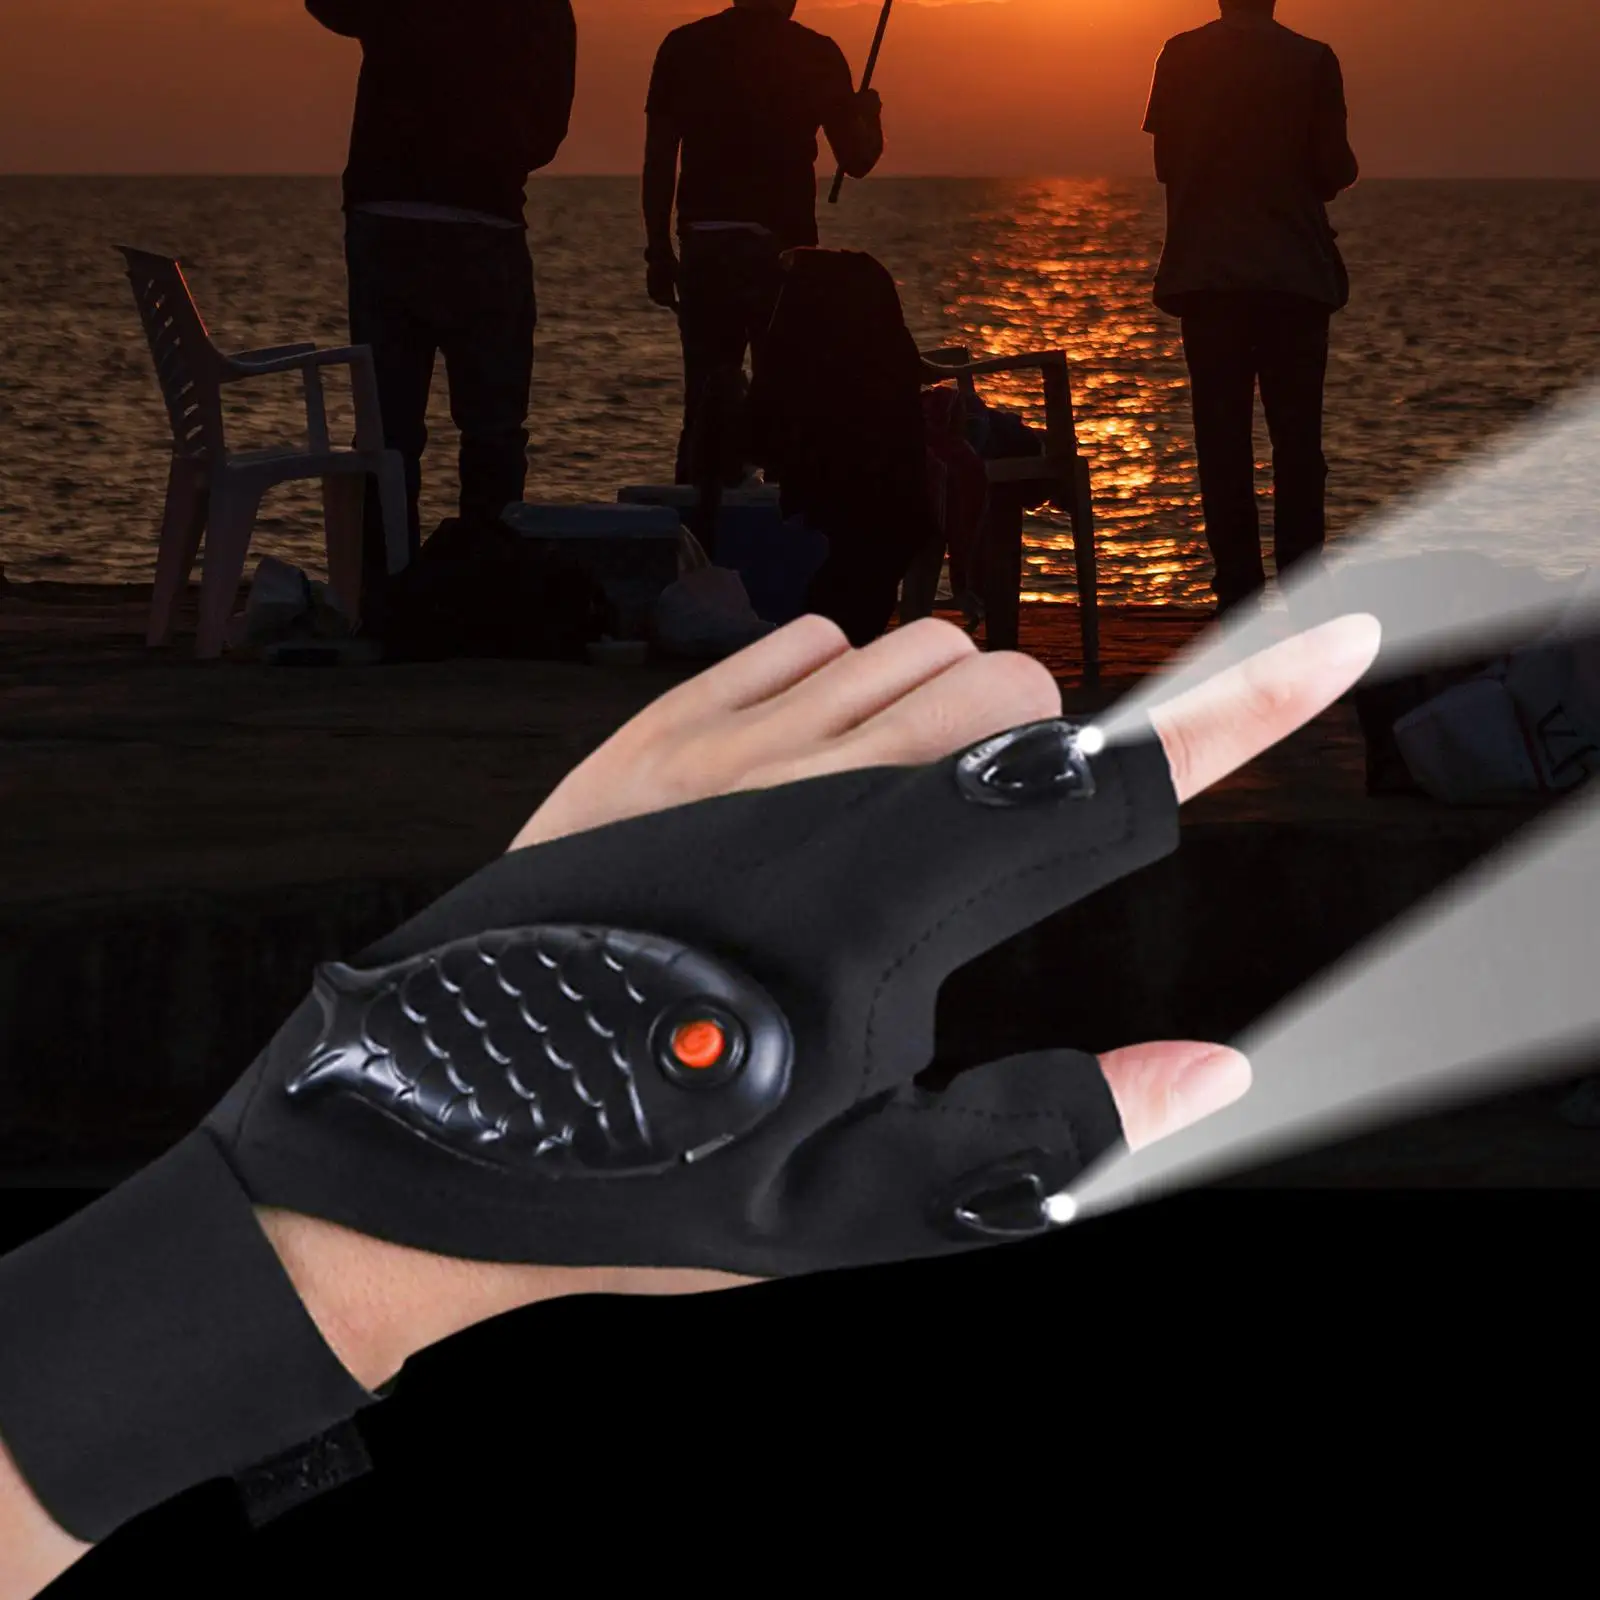 LED Flashlight Gloves Two Finger Gloves Finger Protector Fishing Gloves Hands Free for Unisex Dad Night Fishing Fishing Supplies